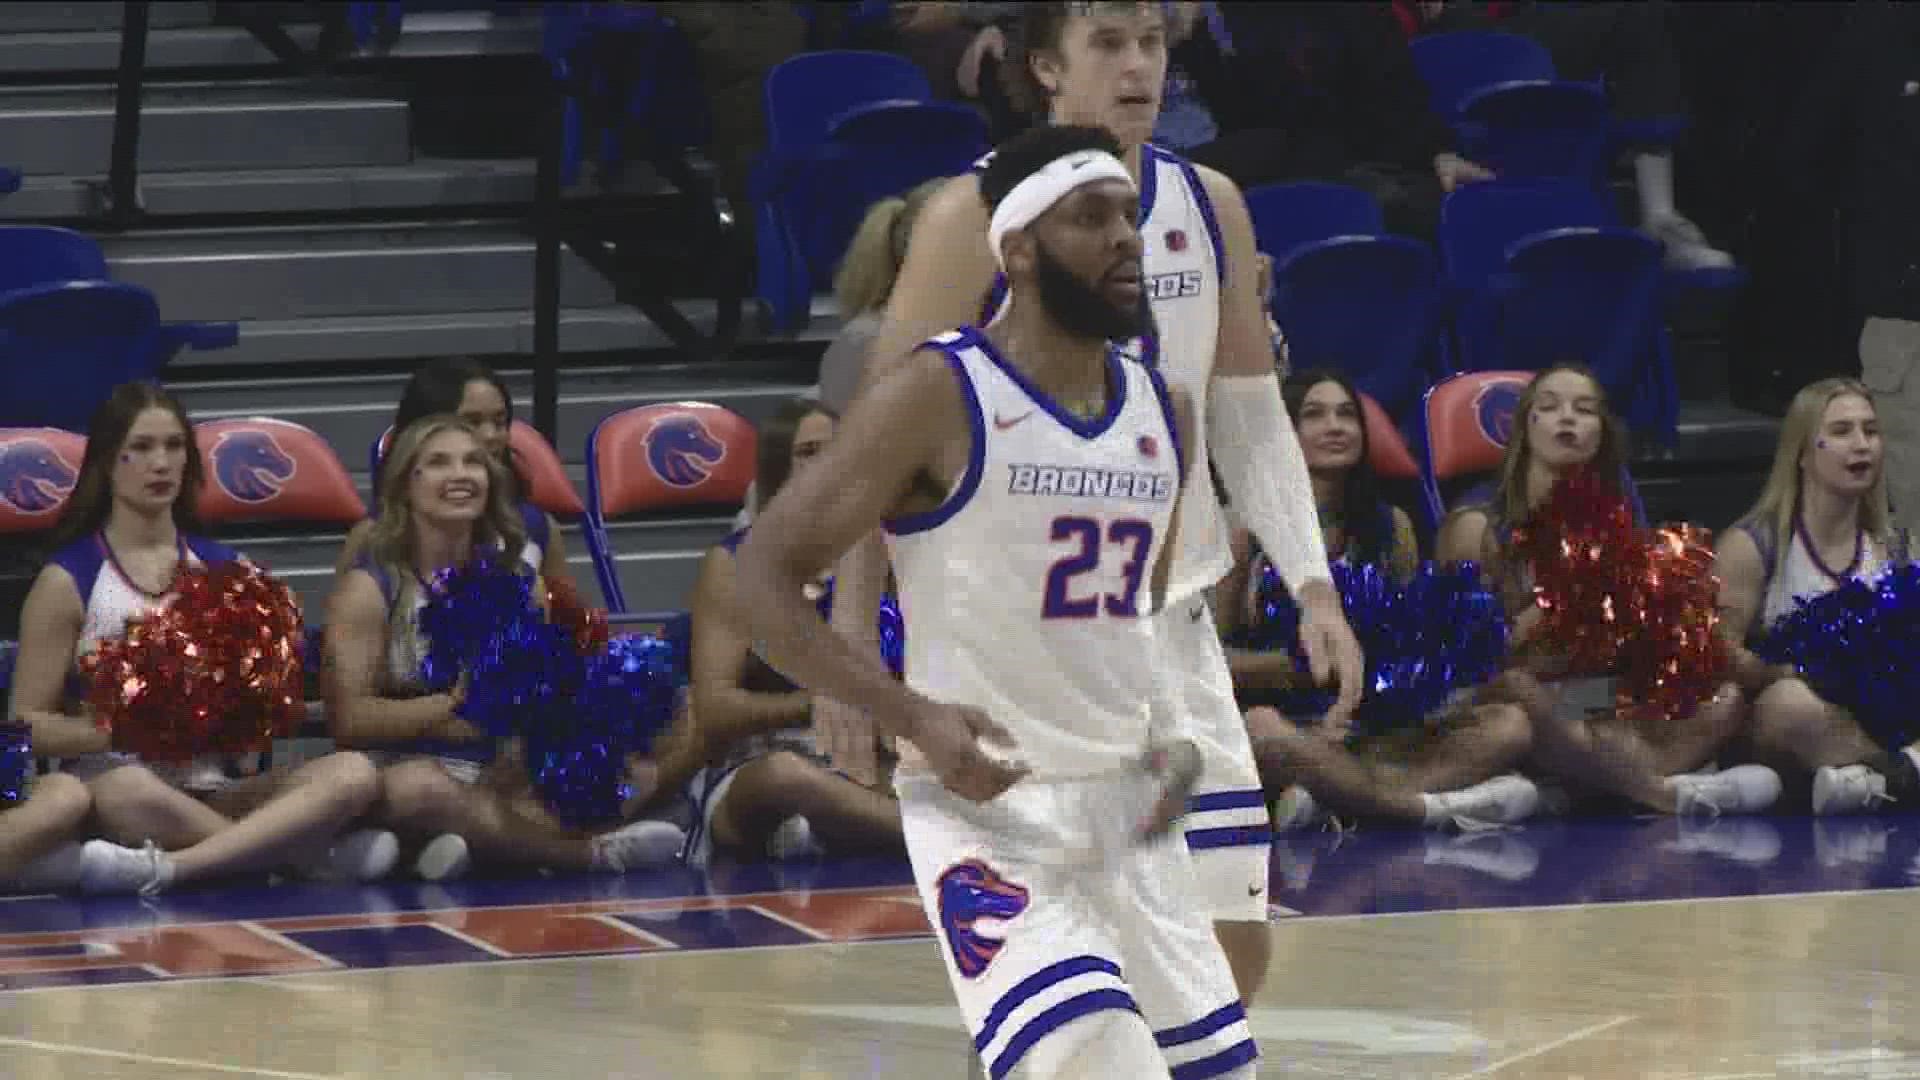 Boise State was led by Chibuzo Agbo (20 points), Tyson Degenhart (19 points) and Naje Smith (17 points) in Saturday's win over Utah Valley at ExtraMile Arena.